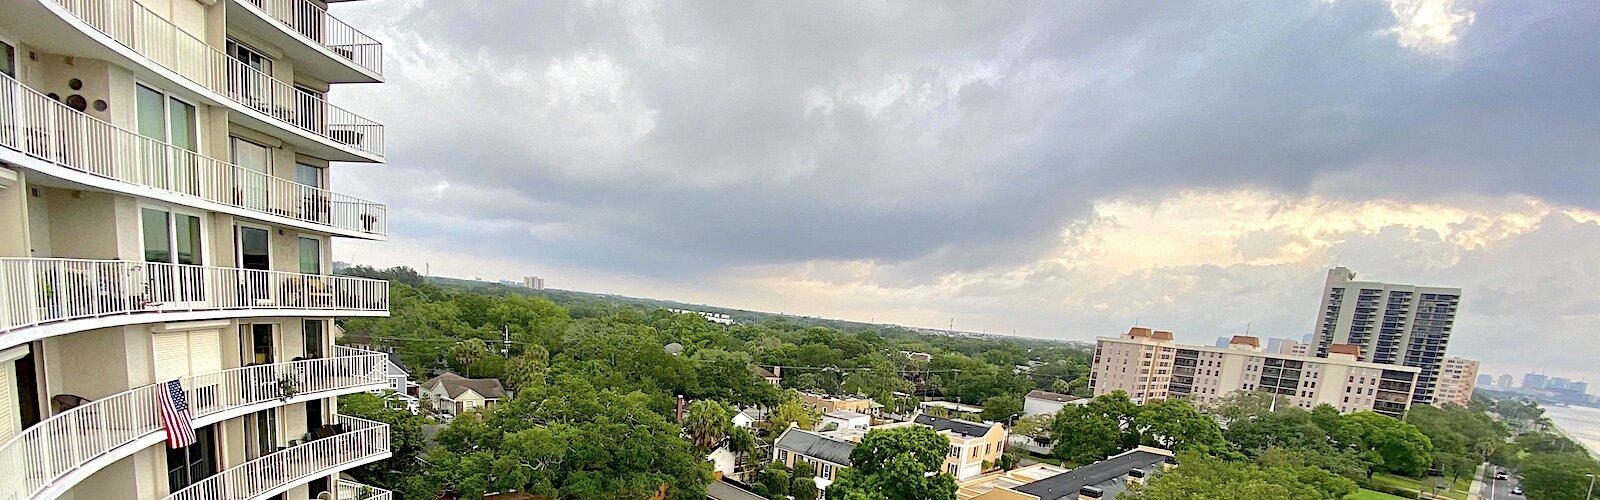 A bird's eye view looking northwest from high atop the Bayshore on a recent stormy day.